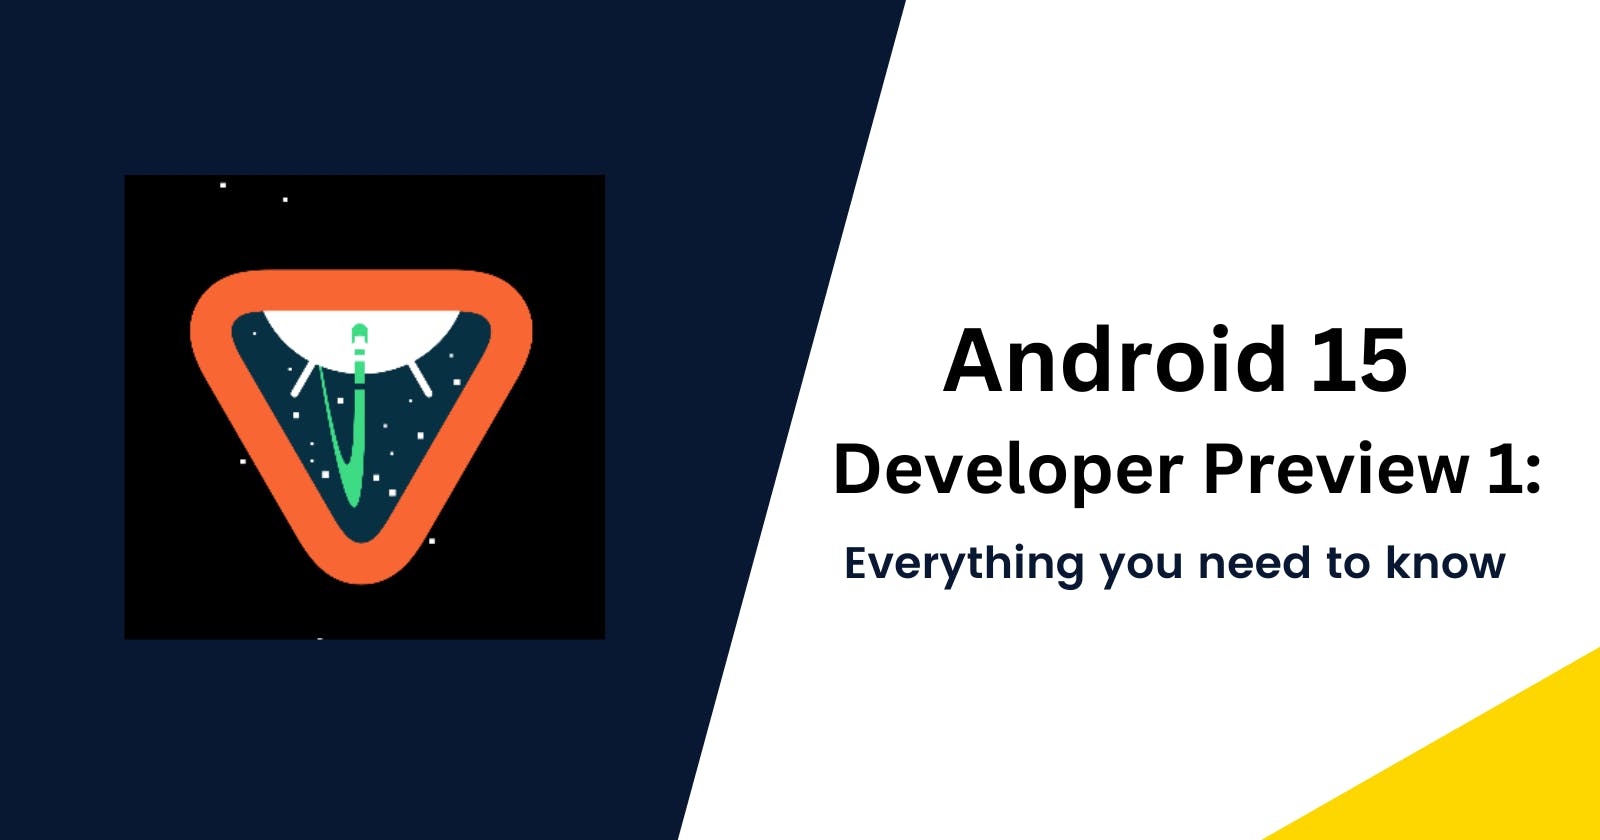 Android 15 Developer Preview 1: Everything you need to know